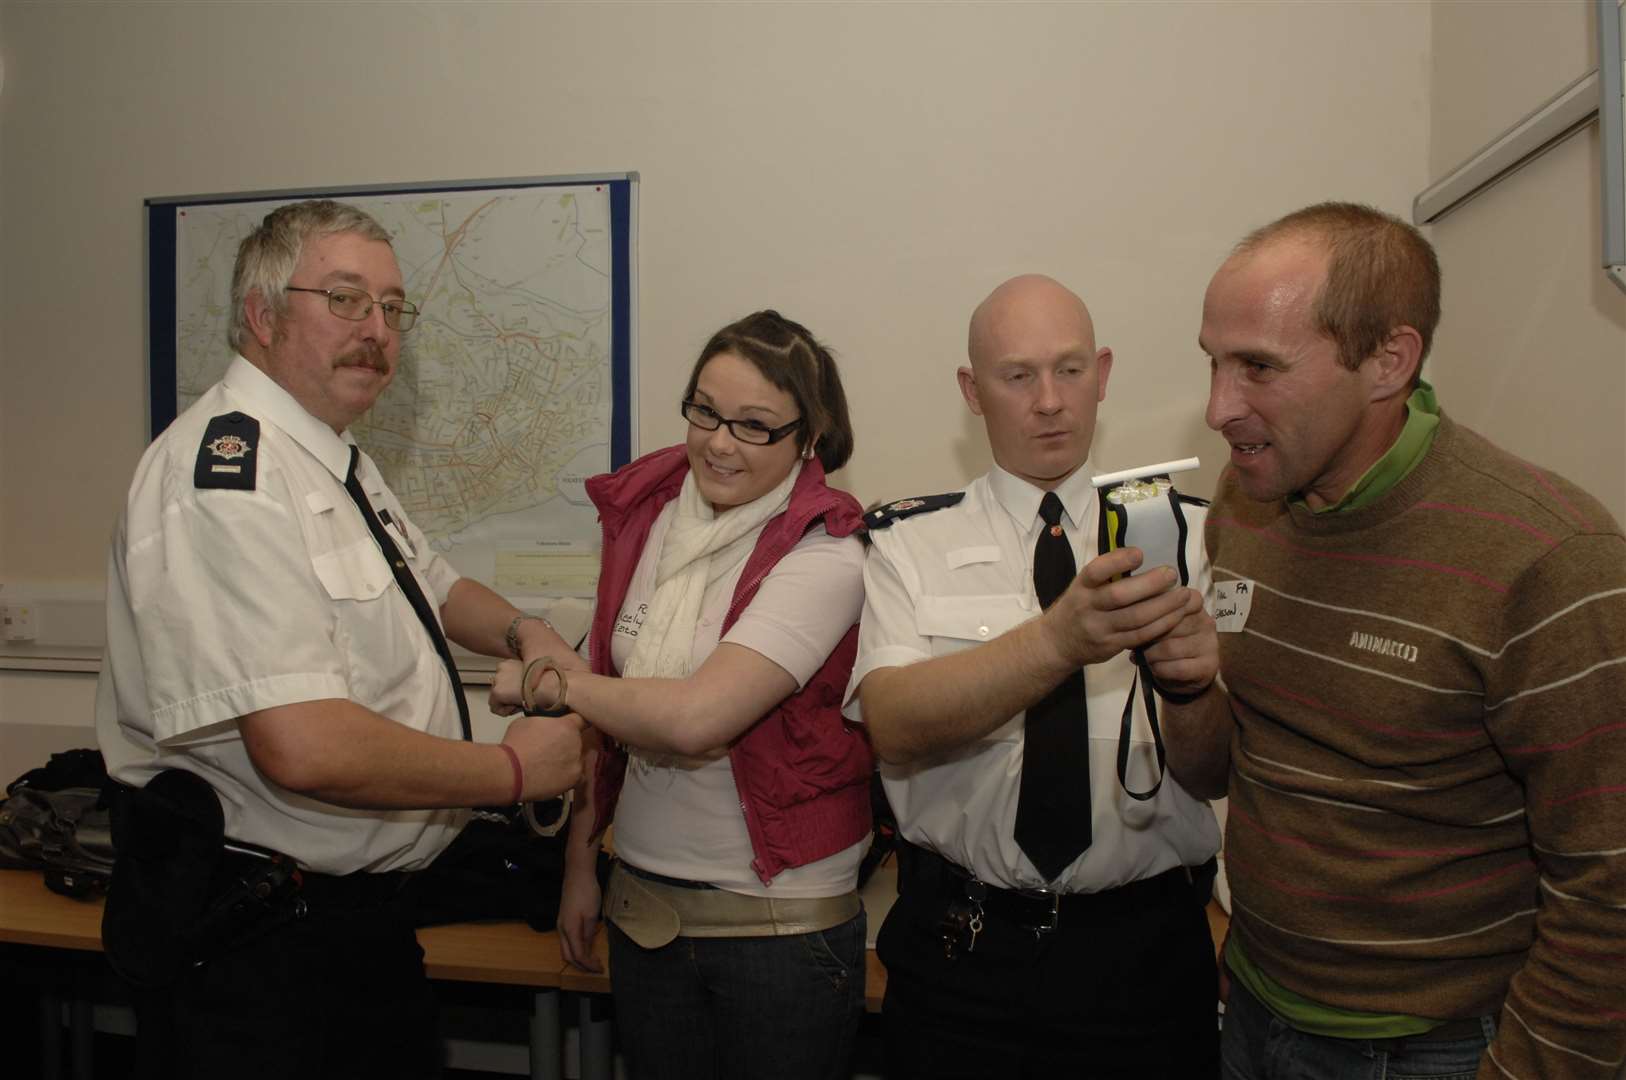 Wayne Couzens (Third from left) at a Kent Police recruitment event for Special officers in 2008 at Folkestone Police Station